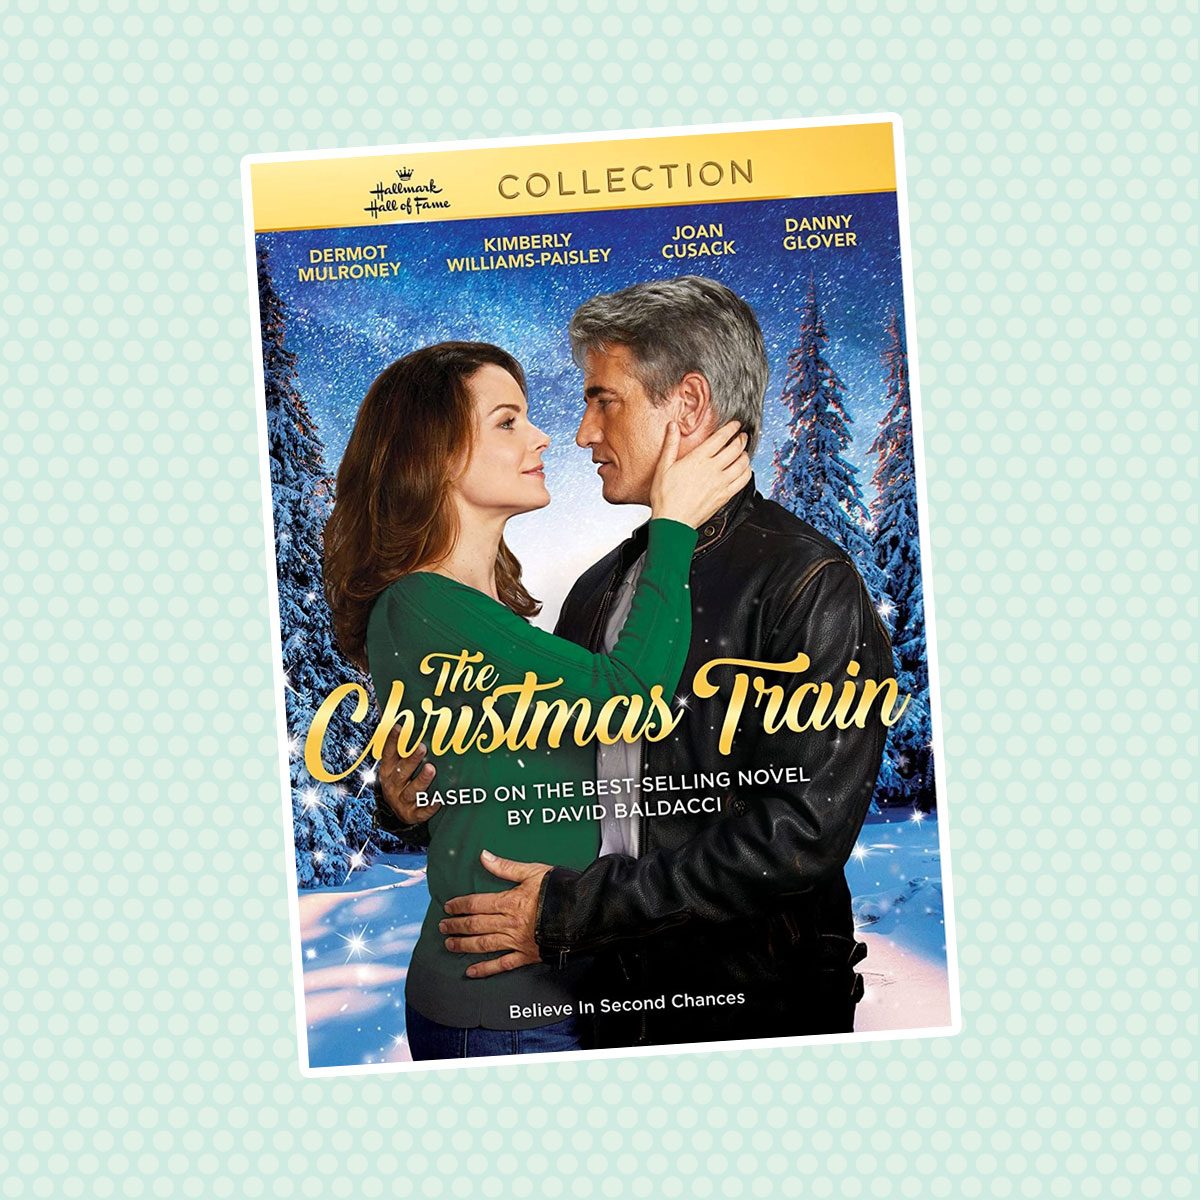 Our Love Story Hallmark Romantic Christmas Card for Significant Other 